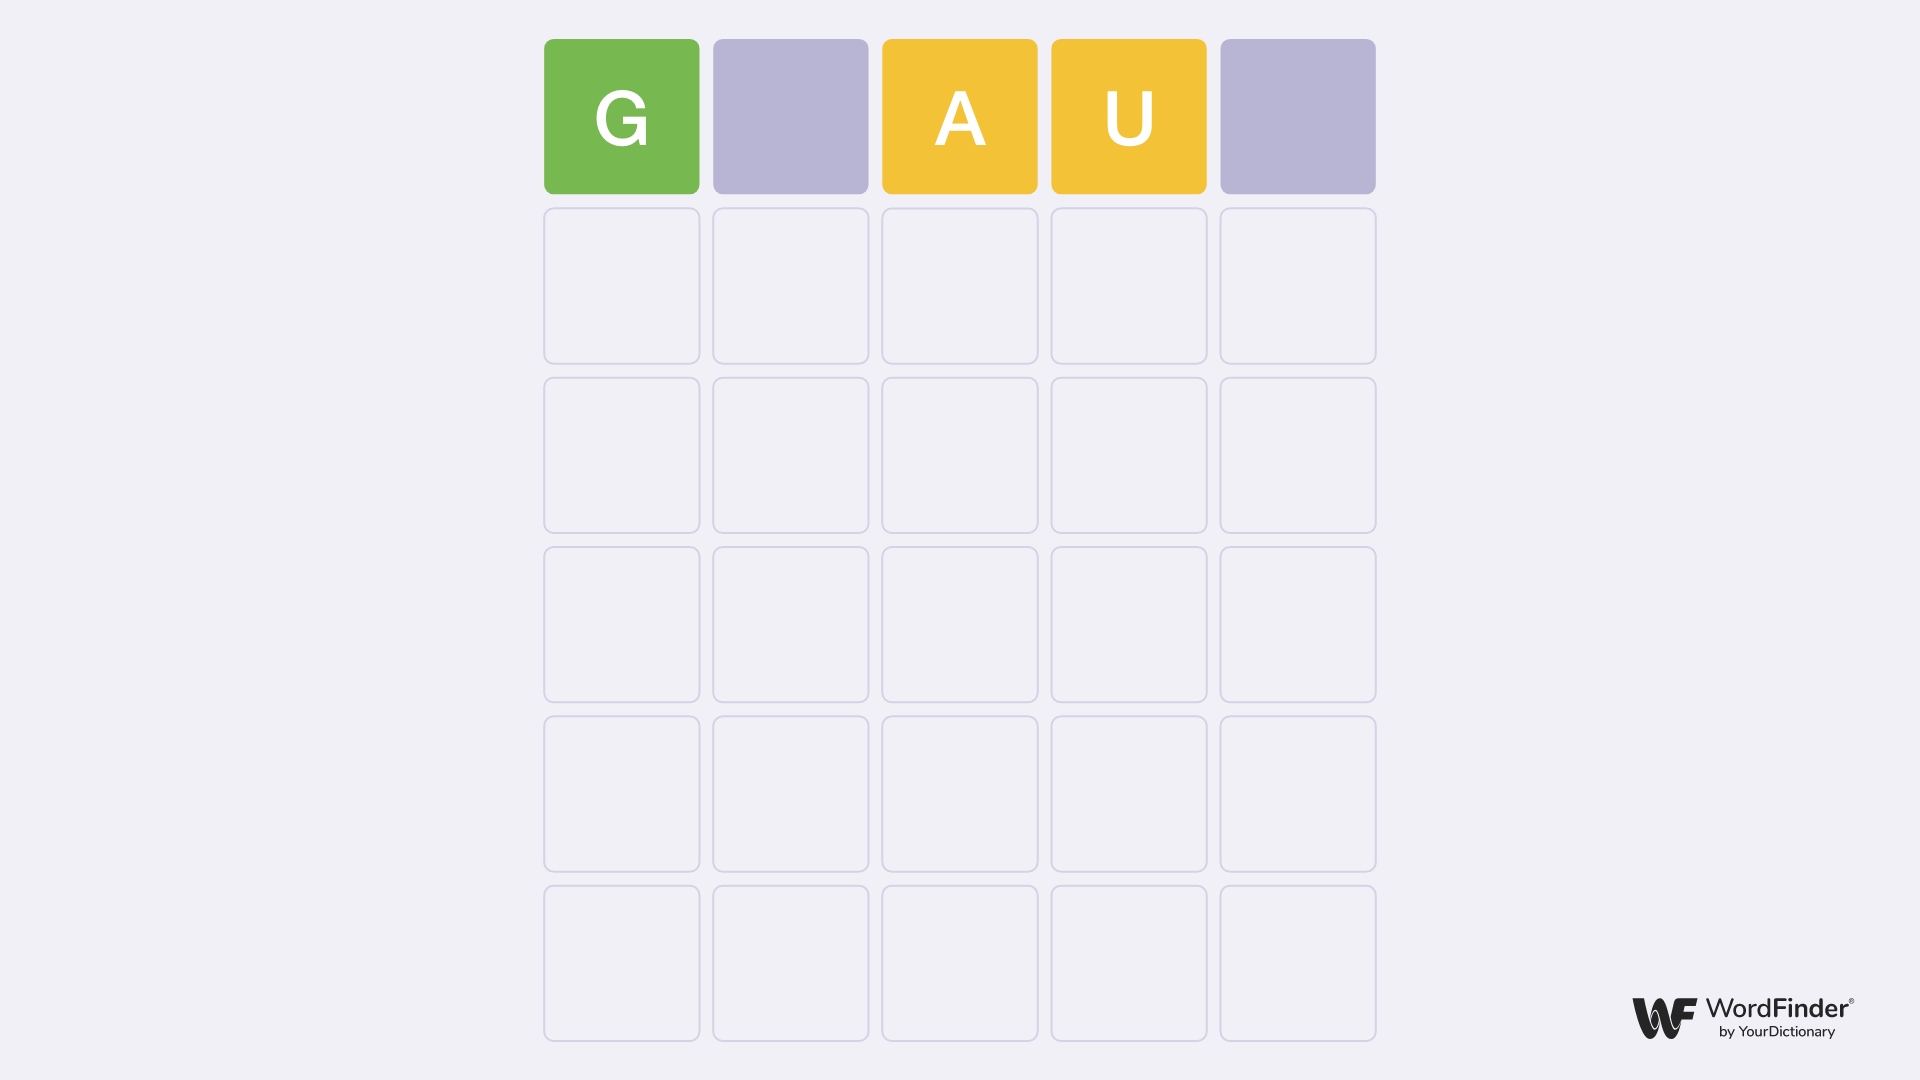 5 letter words that start with G and contain AU